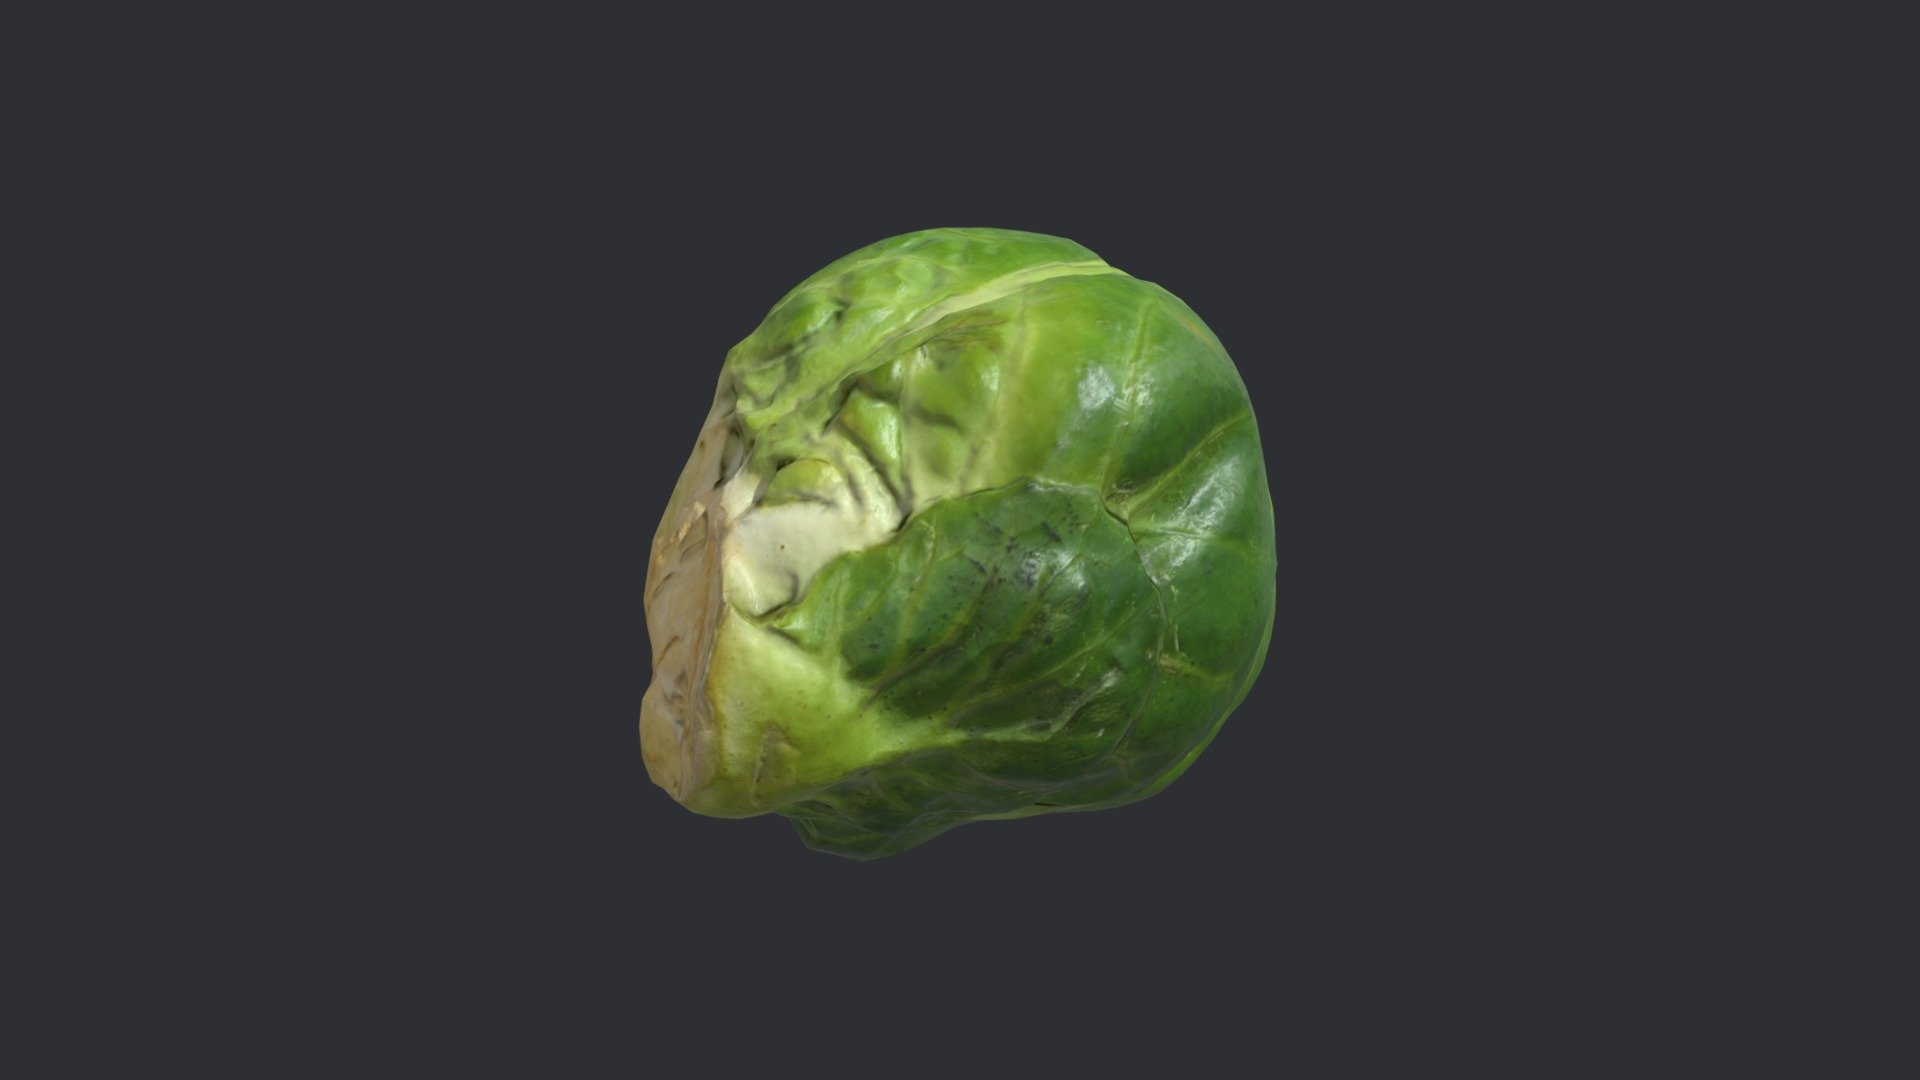 Photogrammetry model of a brussels sprout.

The model has three base levels of detail, optimized into uniform triangles with clean UVs.

Lod 1 = 63,744 tris,

Lod 2 = 3,984 tris,

Lod 3 = 996tris.

The model has 4K PNG textures (Albedo, Normal, Ambient Occlusion, Roughness and Gloss). All levels of detail share the same textures except for the Normal, where each LOD has a unique Normal map.

Lod 2 used for 3D preview with 1K JPG textures.

Real world scale 3d model